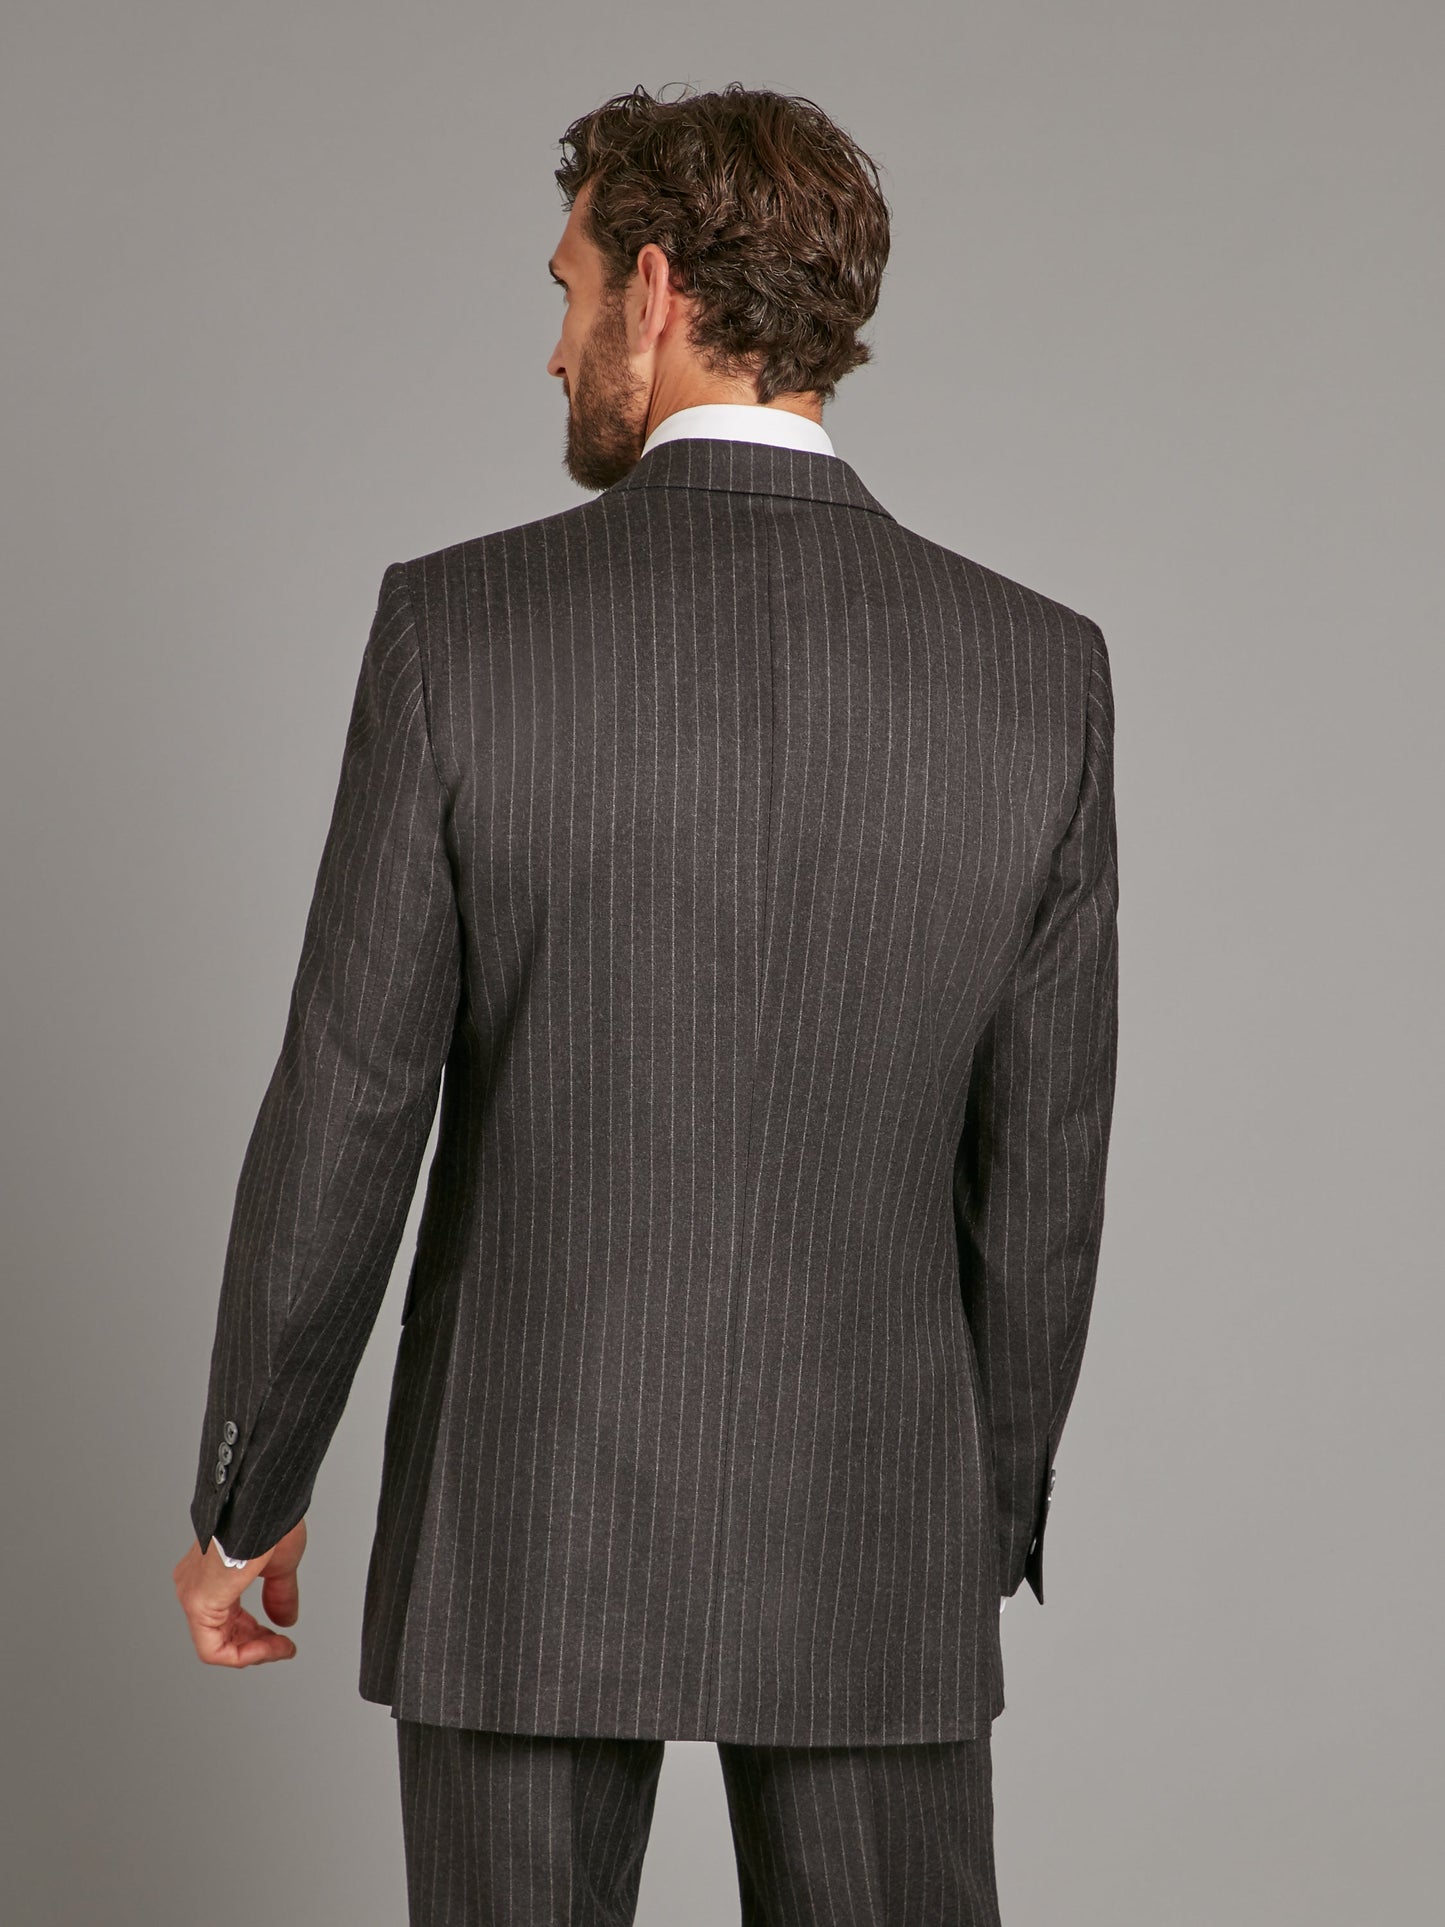 carlyle suit chalk stripe flannel charcoal 3